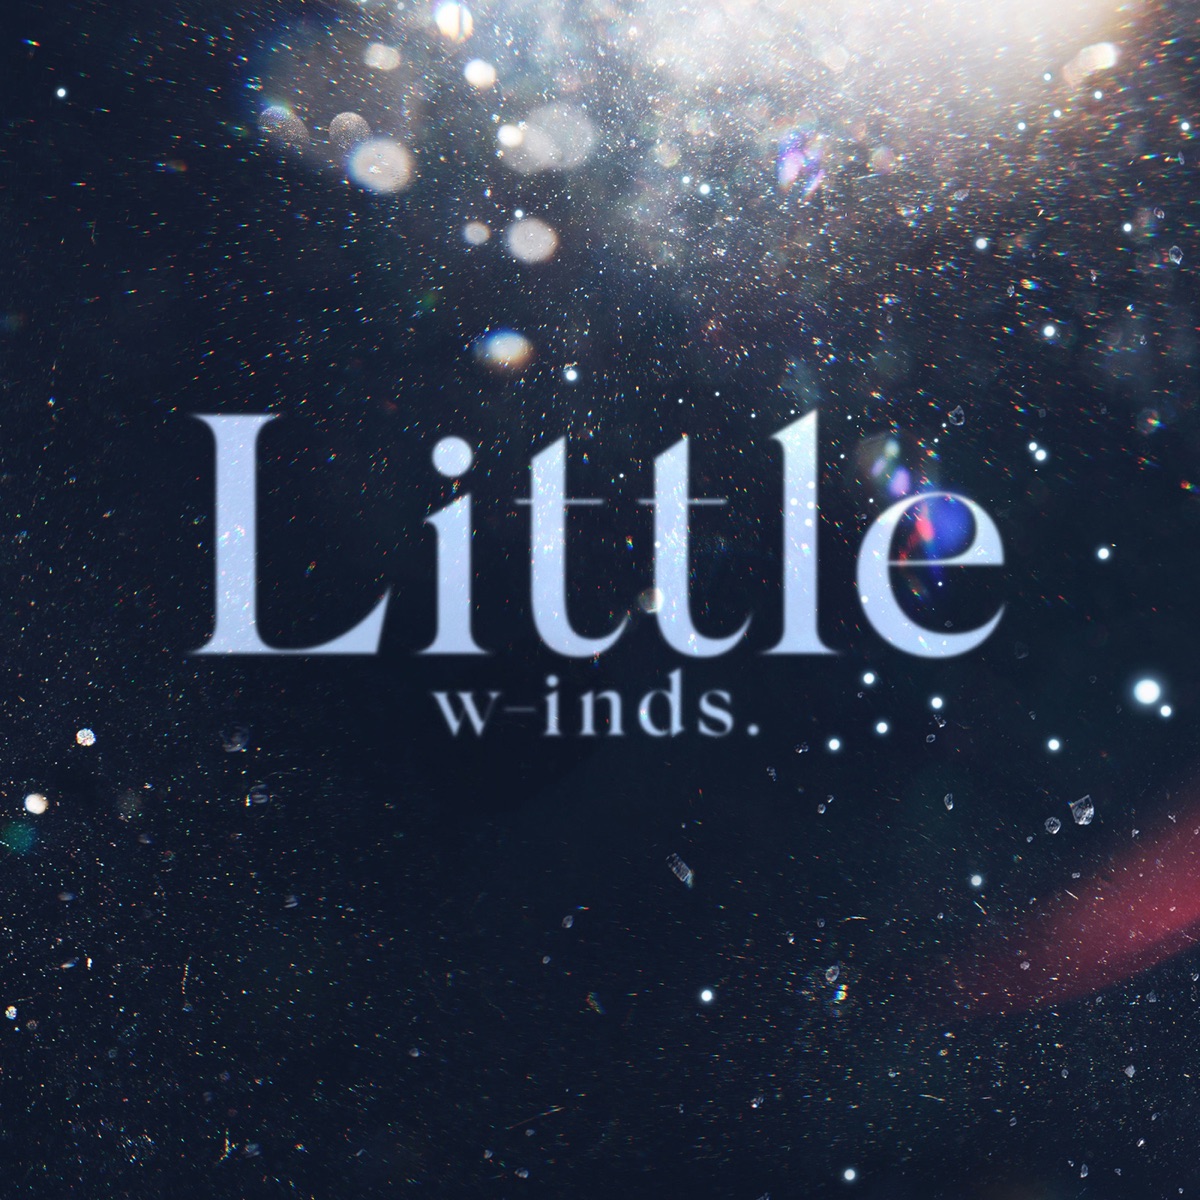 Cover art for『w-inds. - Little』from the release『Little